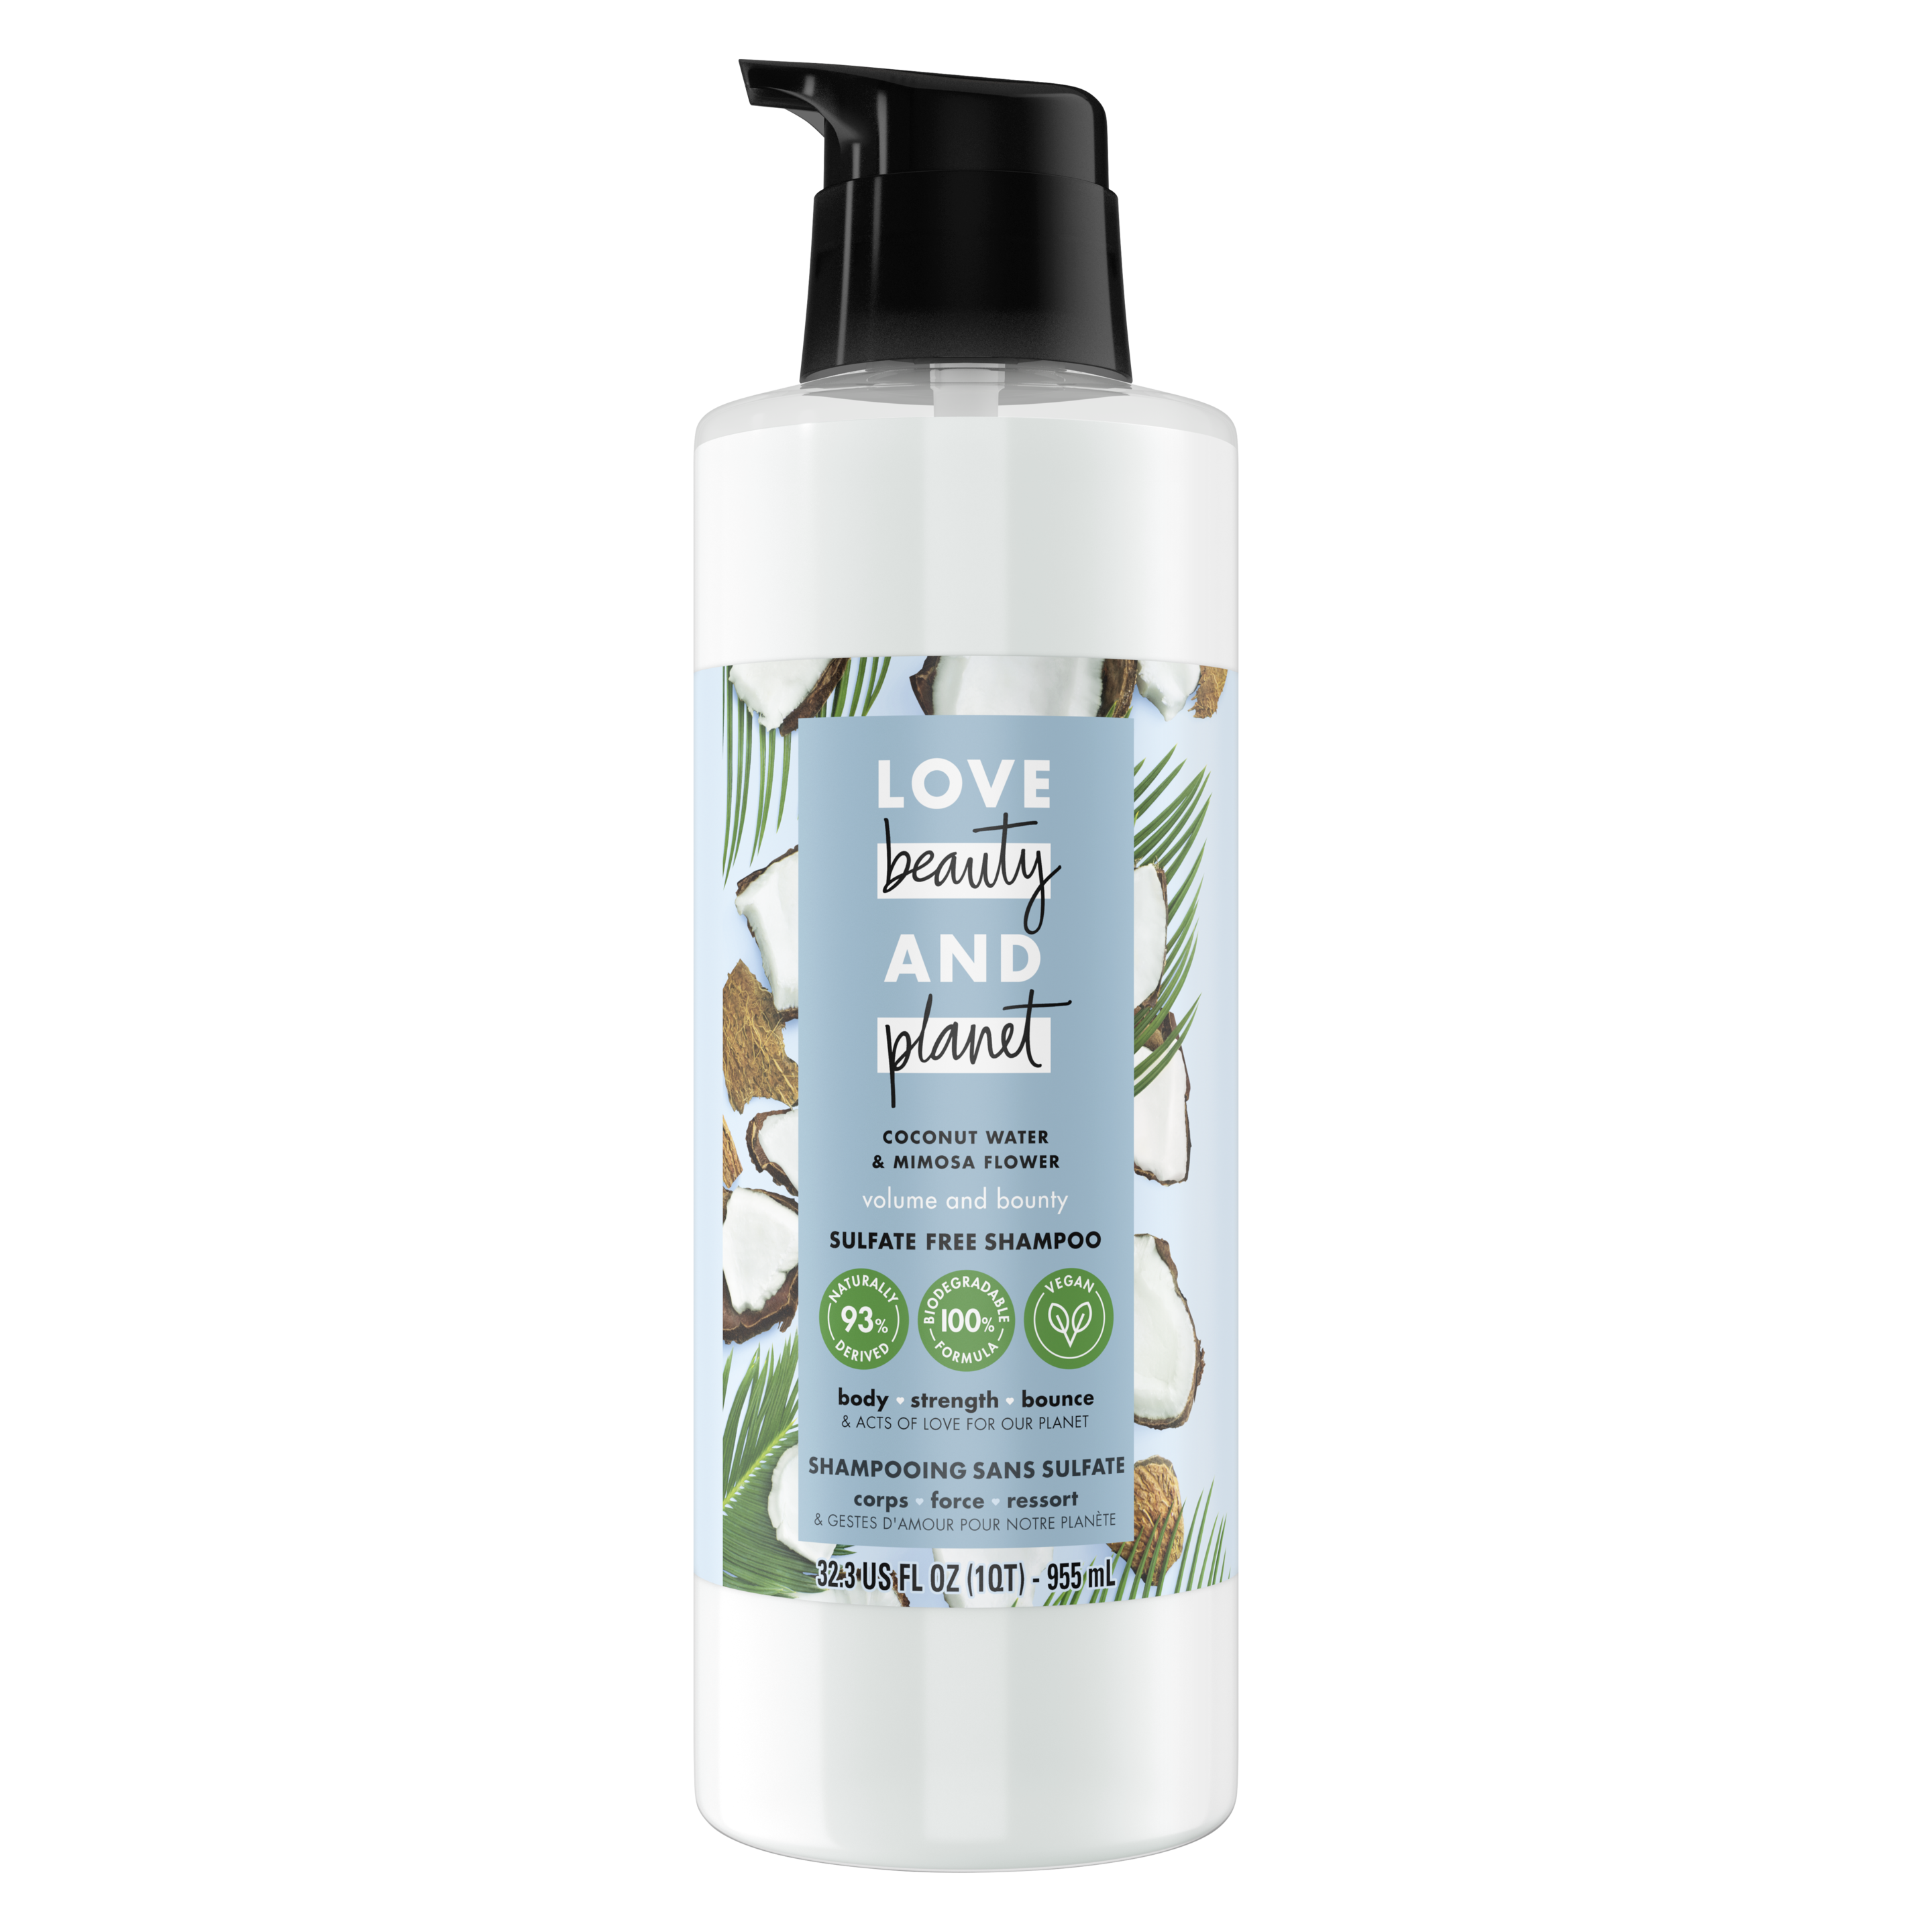 sulfate-free coconut water & mimosa flower shampoo refill